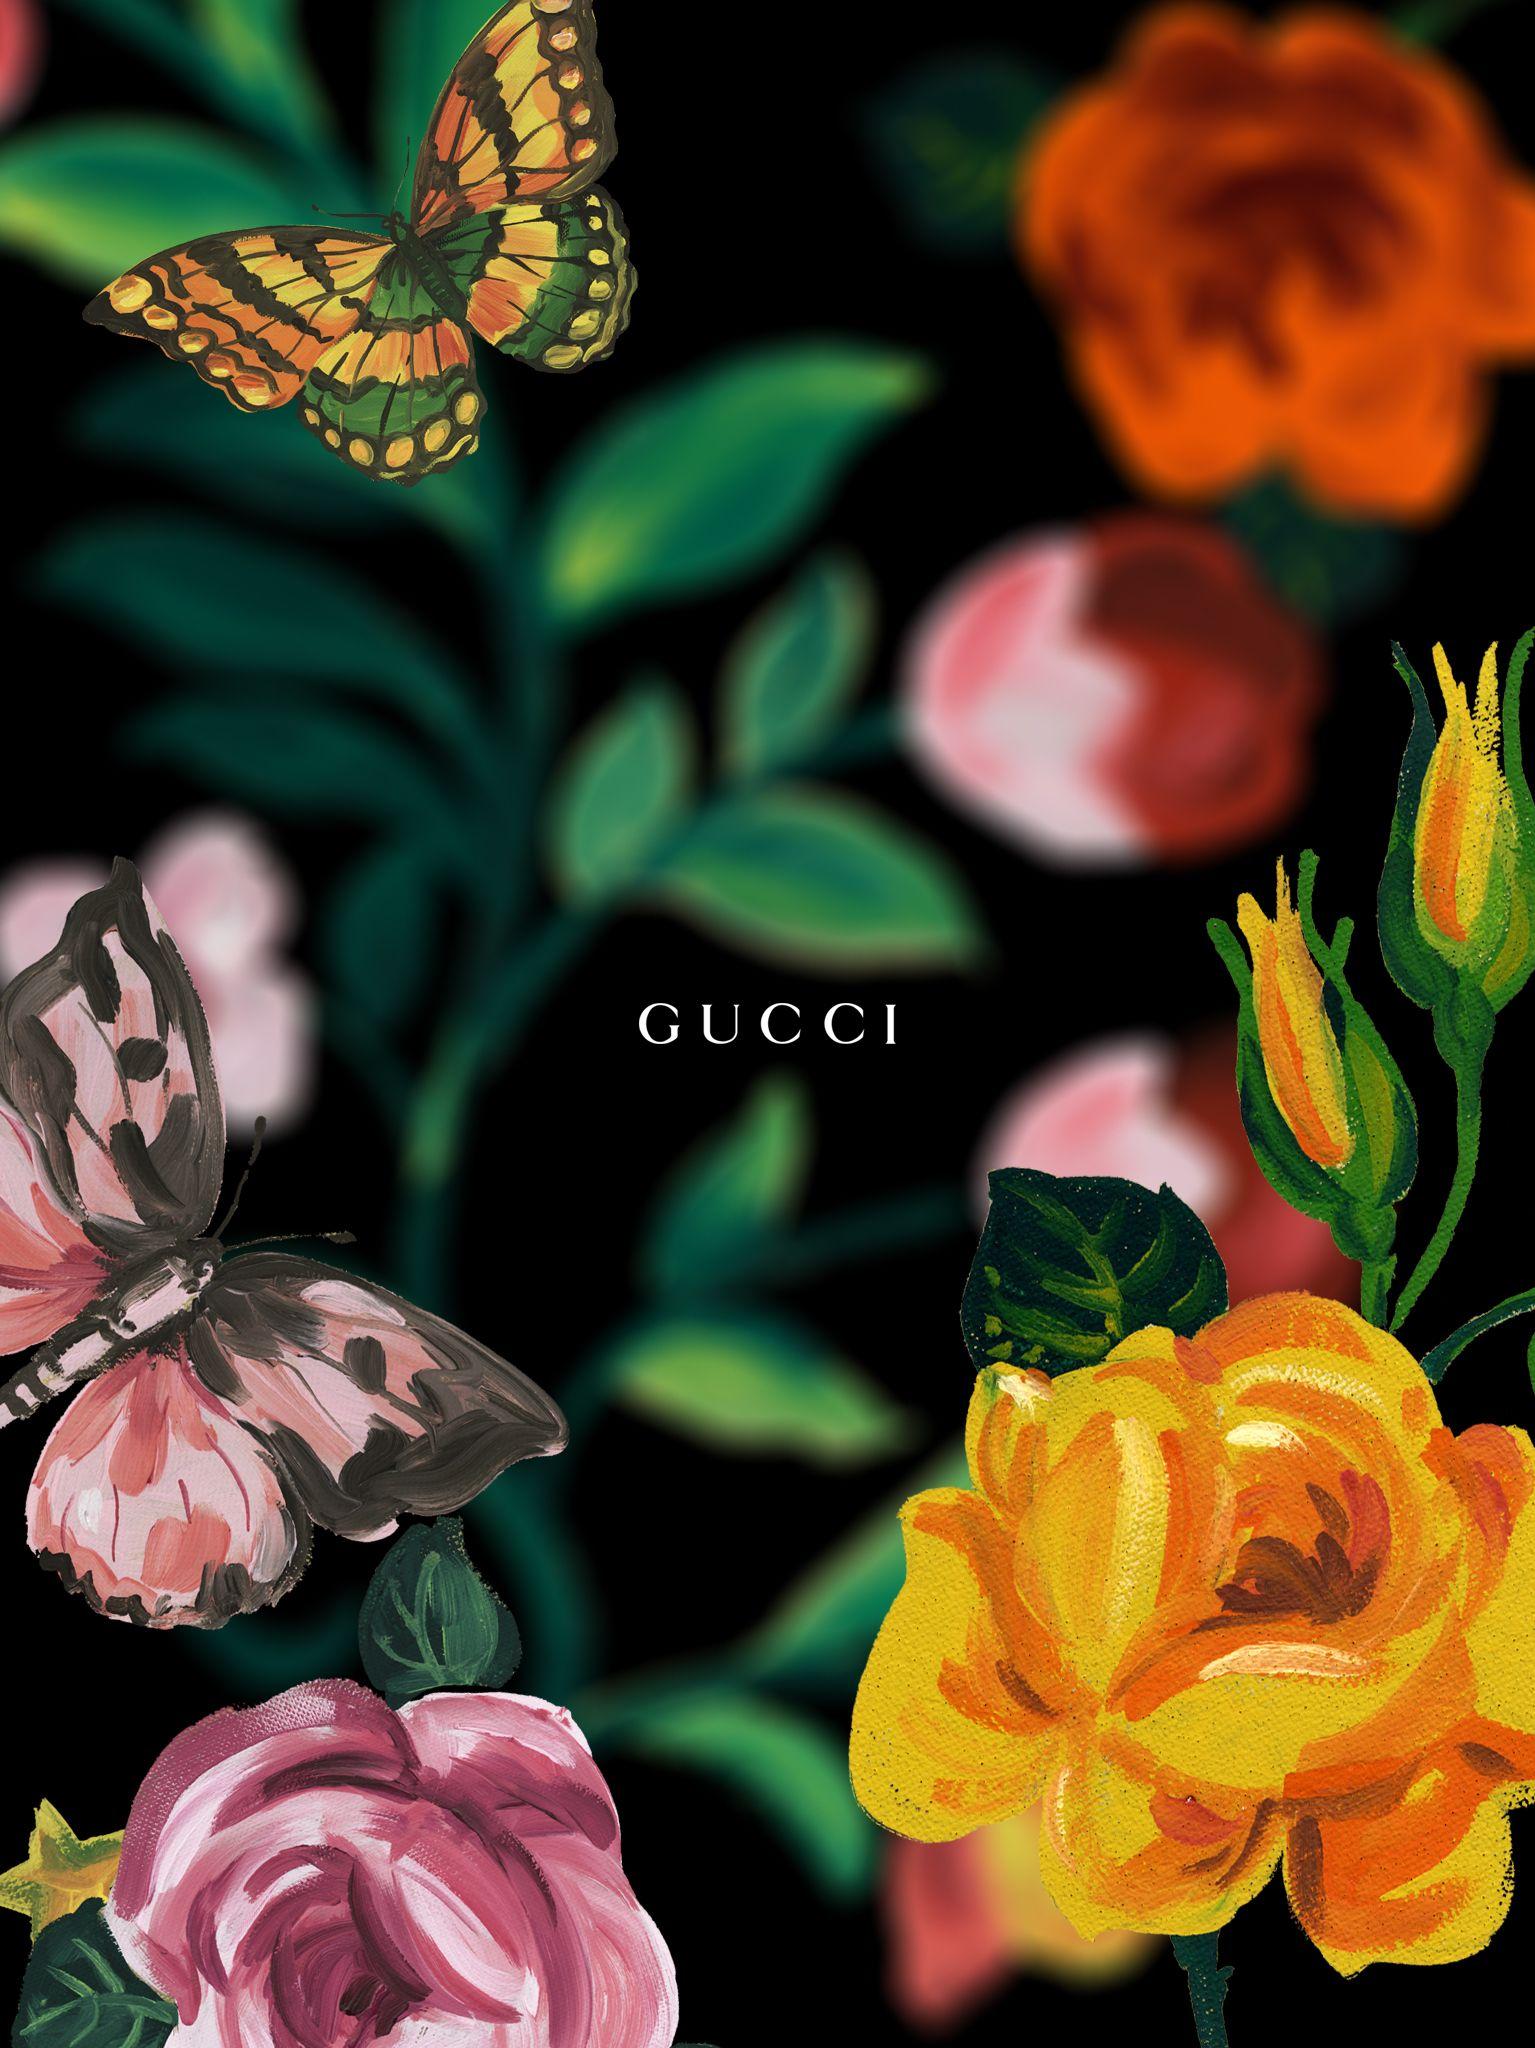 Gucci Iphone Hd Wallpapers Top Free Gucci Iphone Hd Backgrounds Wallpaperaccess